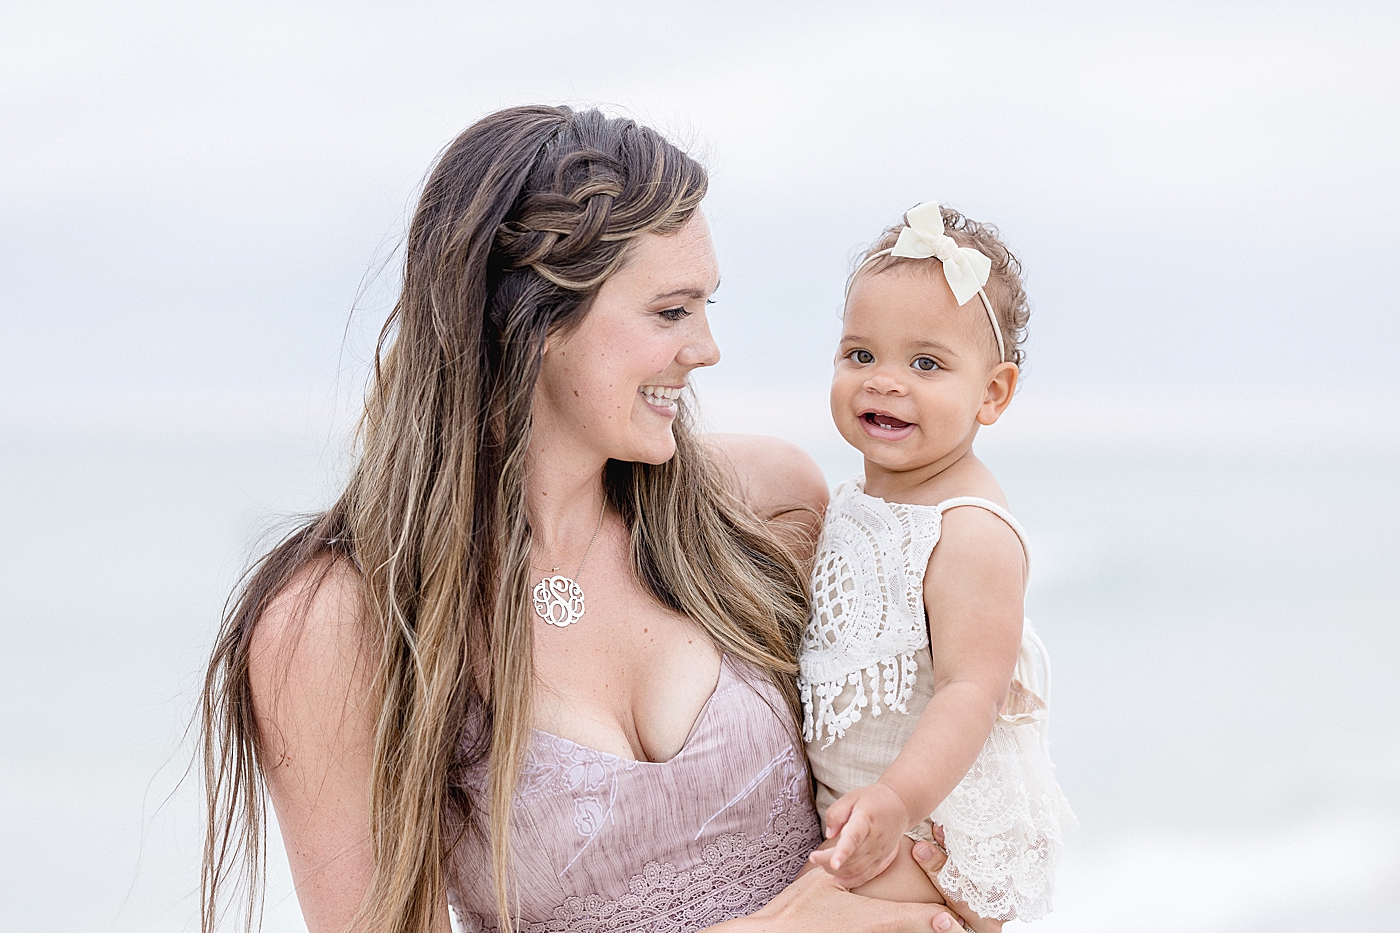 Mom and her baby girl for her first birthday session. Photo by Brittany Elise Photography.